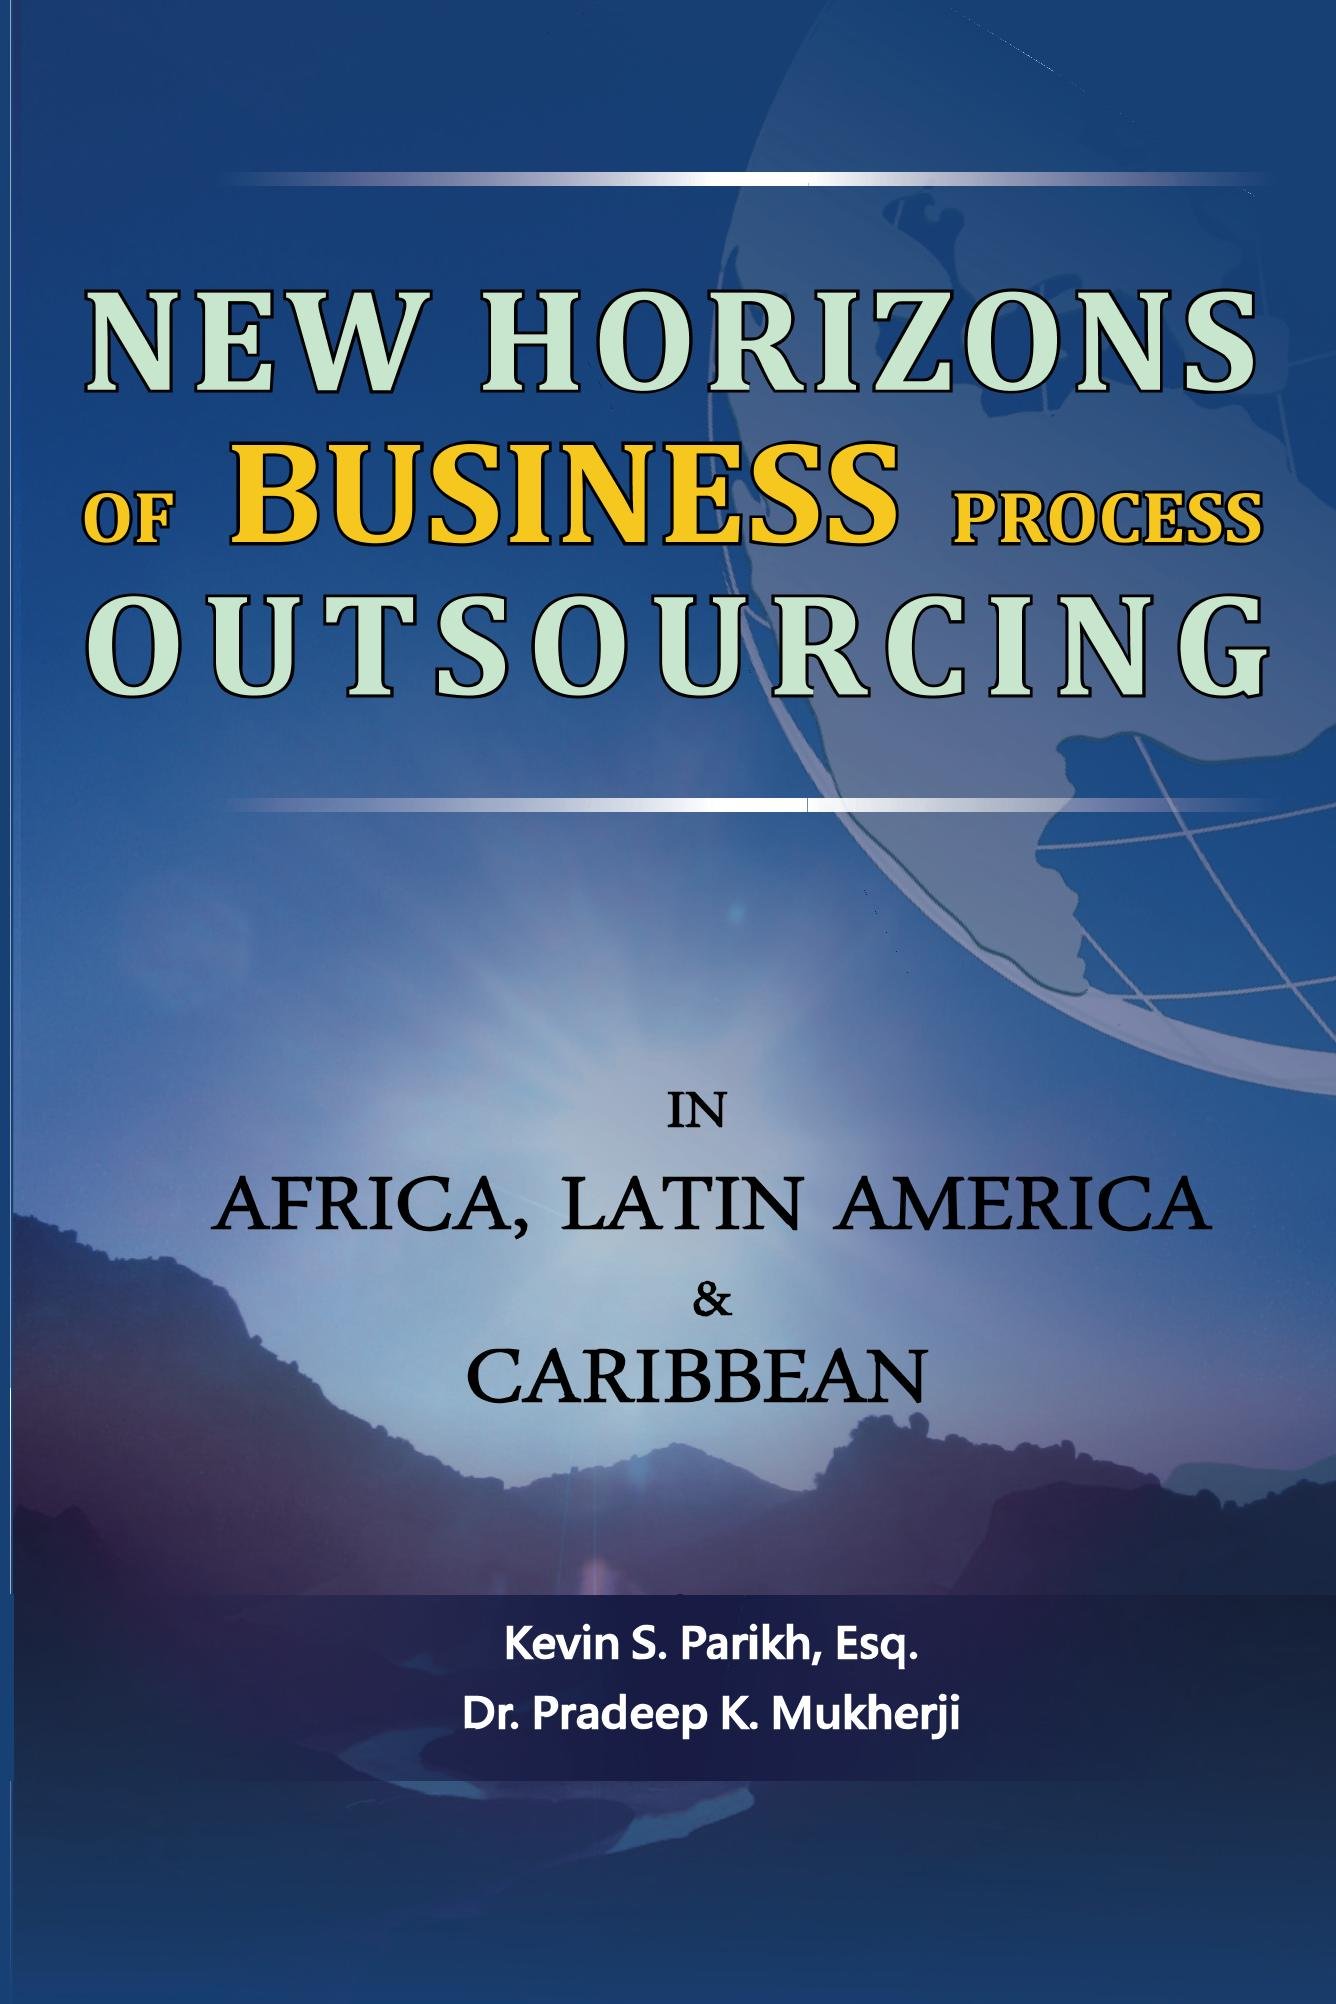 New Horizons of Business Process Outsourcing in Africa, Latin America and Caribbean